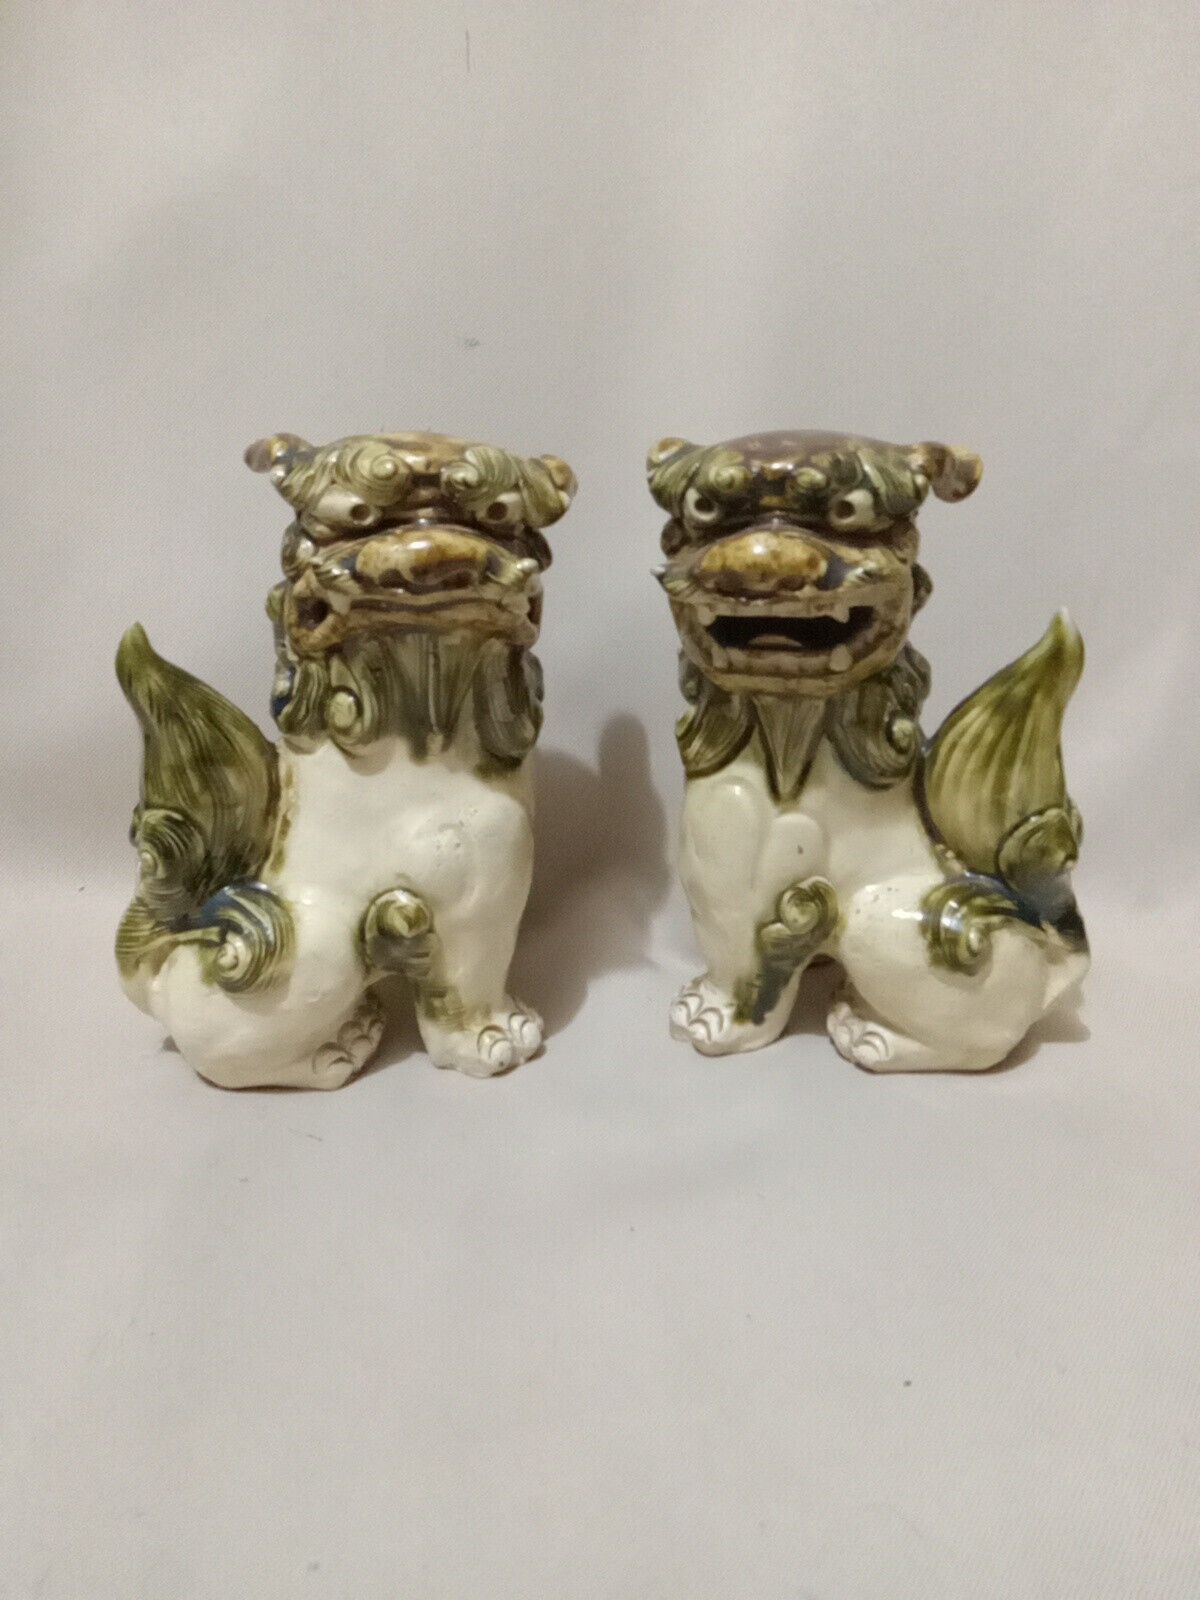 Pair of Vintage Chinese FOO DOGS Glazed Ceramic Sculptures